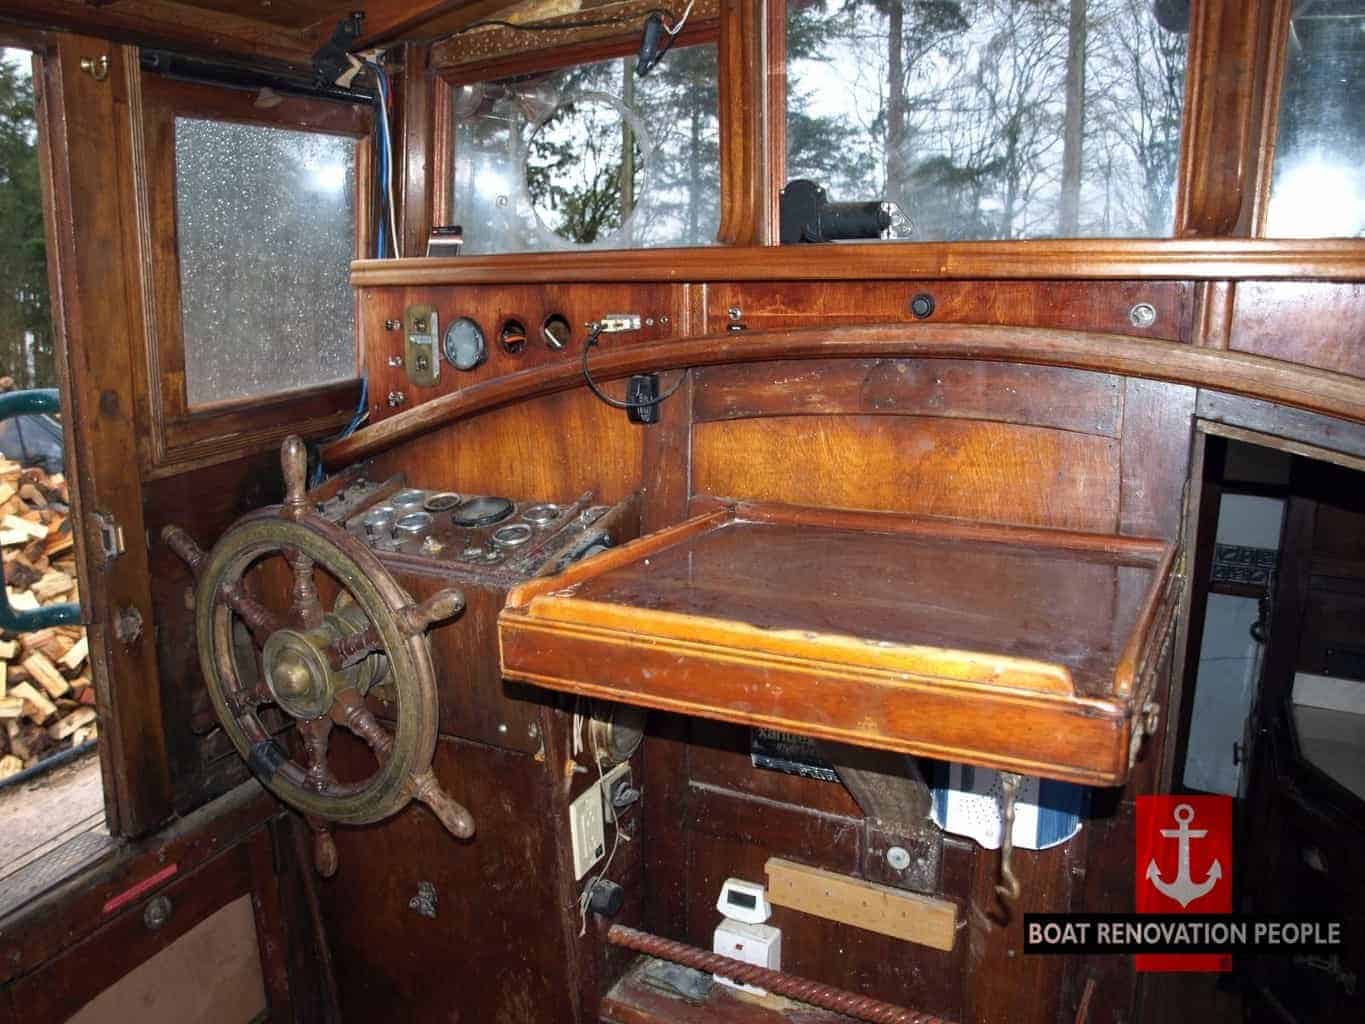 35ft classic wooden boat -sold - boat renovation people